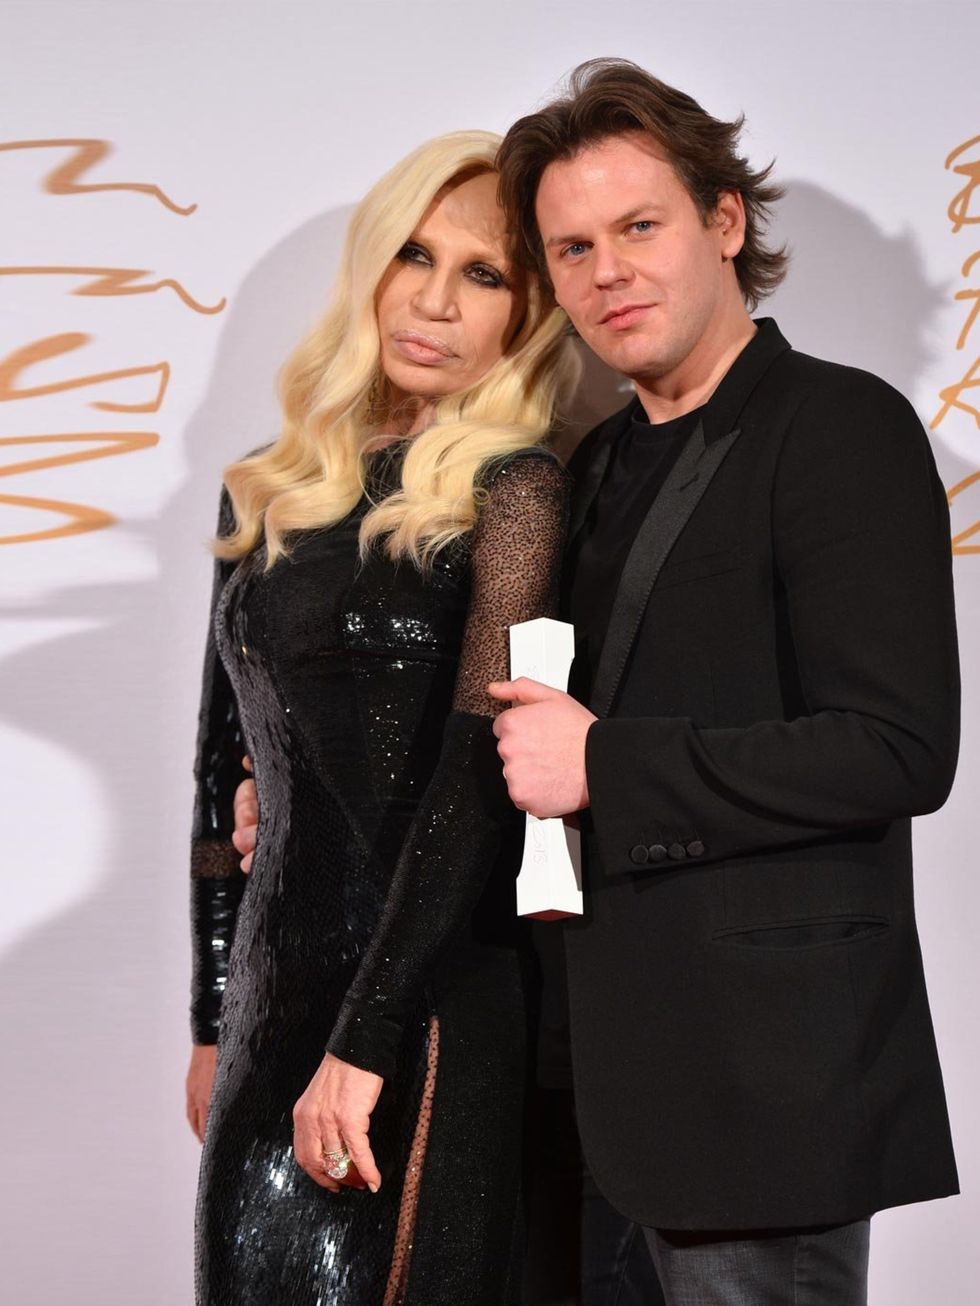 <p><strong>Womenswear Designer of the Year Award</strong></p><p>Christopher Kane poses with his award with Donatella Versace. </p><p><a href="http://www.elleuk.com/star-style/red-carpet/british-fashion-awards-designers-celebrities-kate-moss-rita-ora-daisy